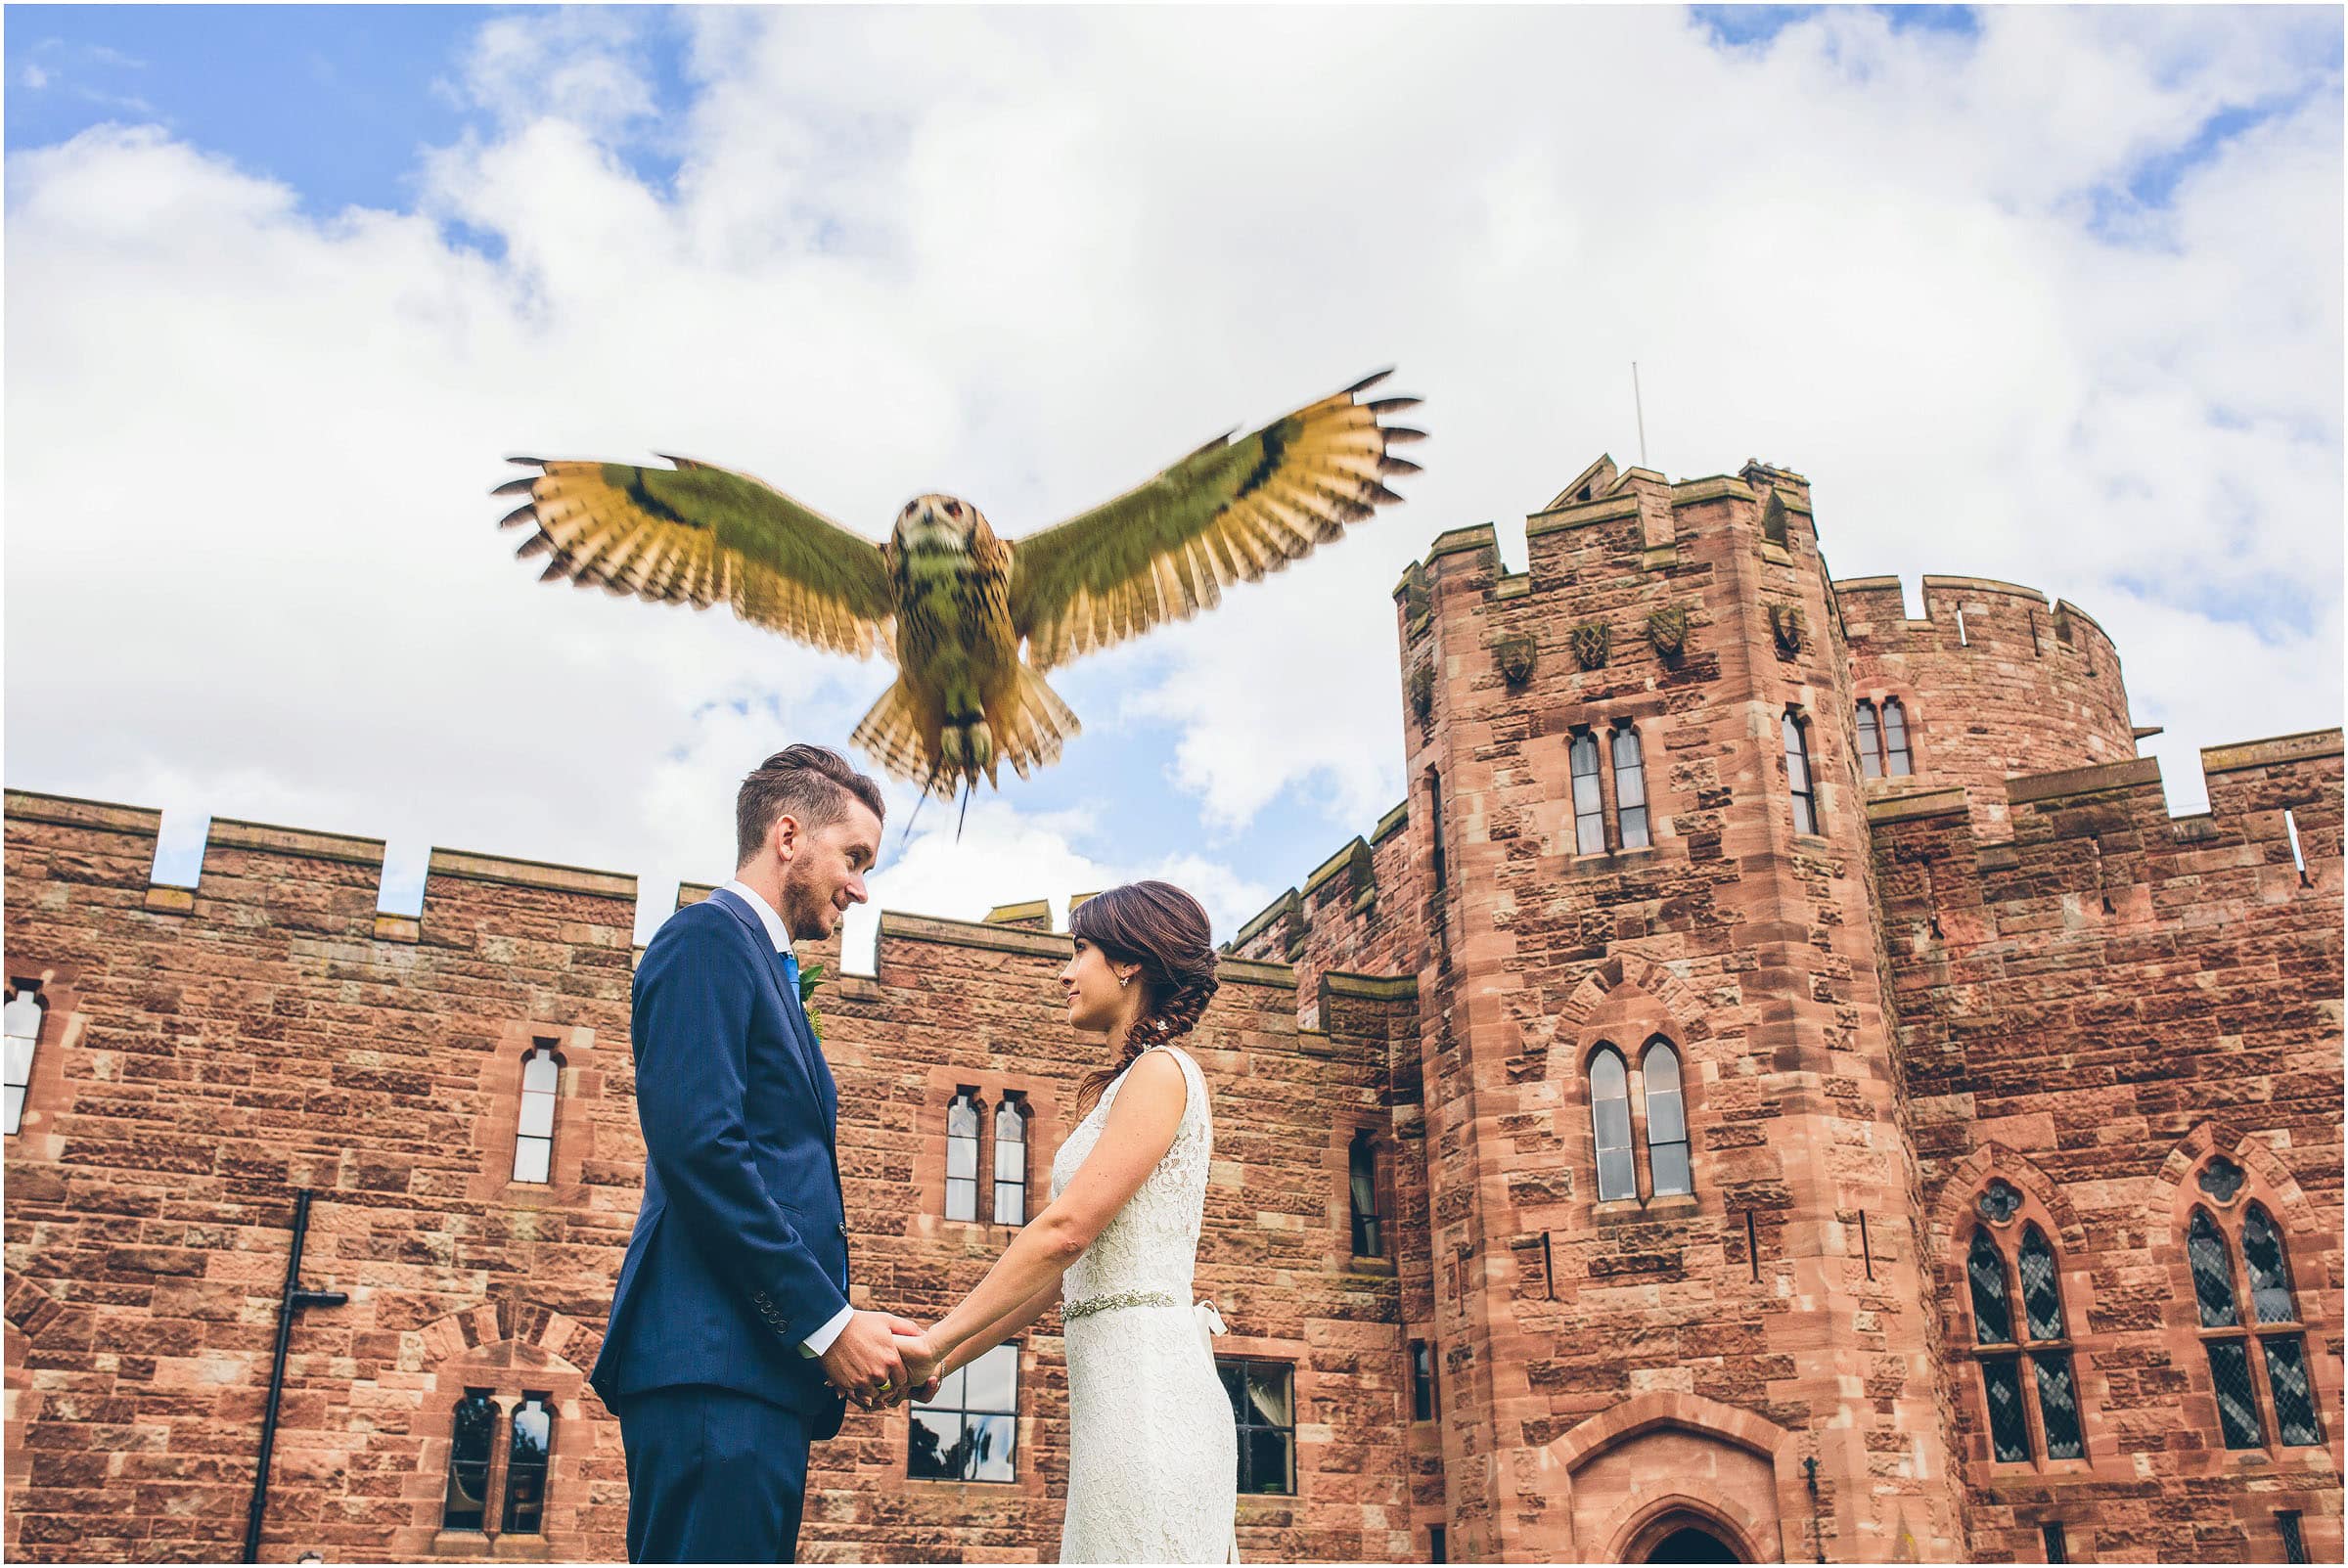 A bird of prey flies over the heads of a bride and groom at their Peckforton Castle wedding